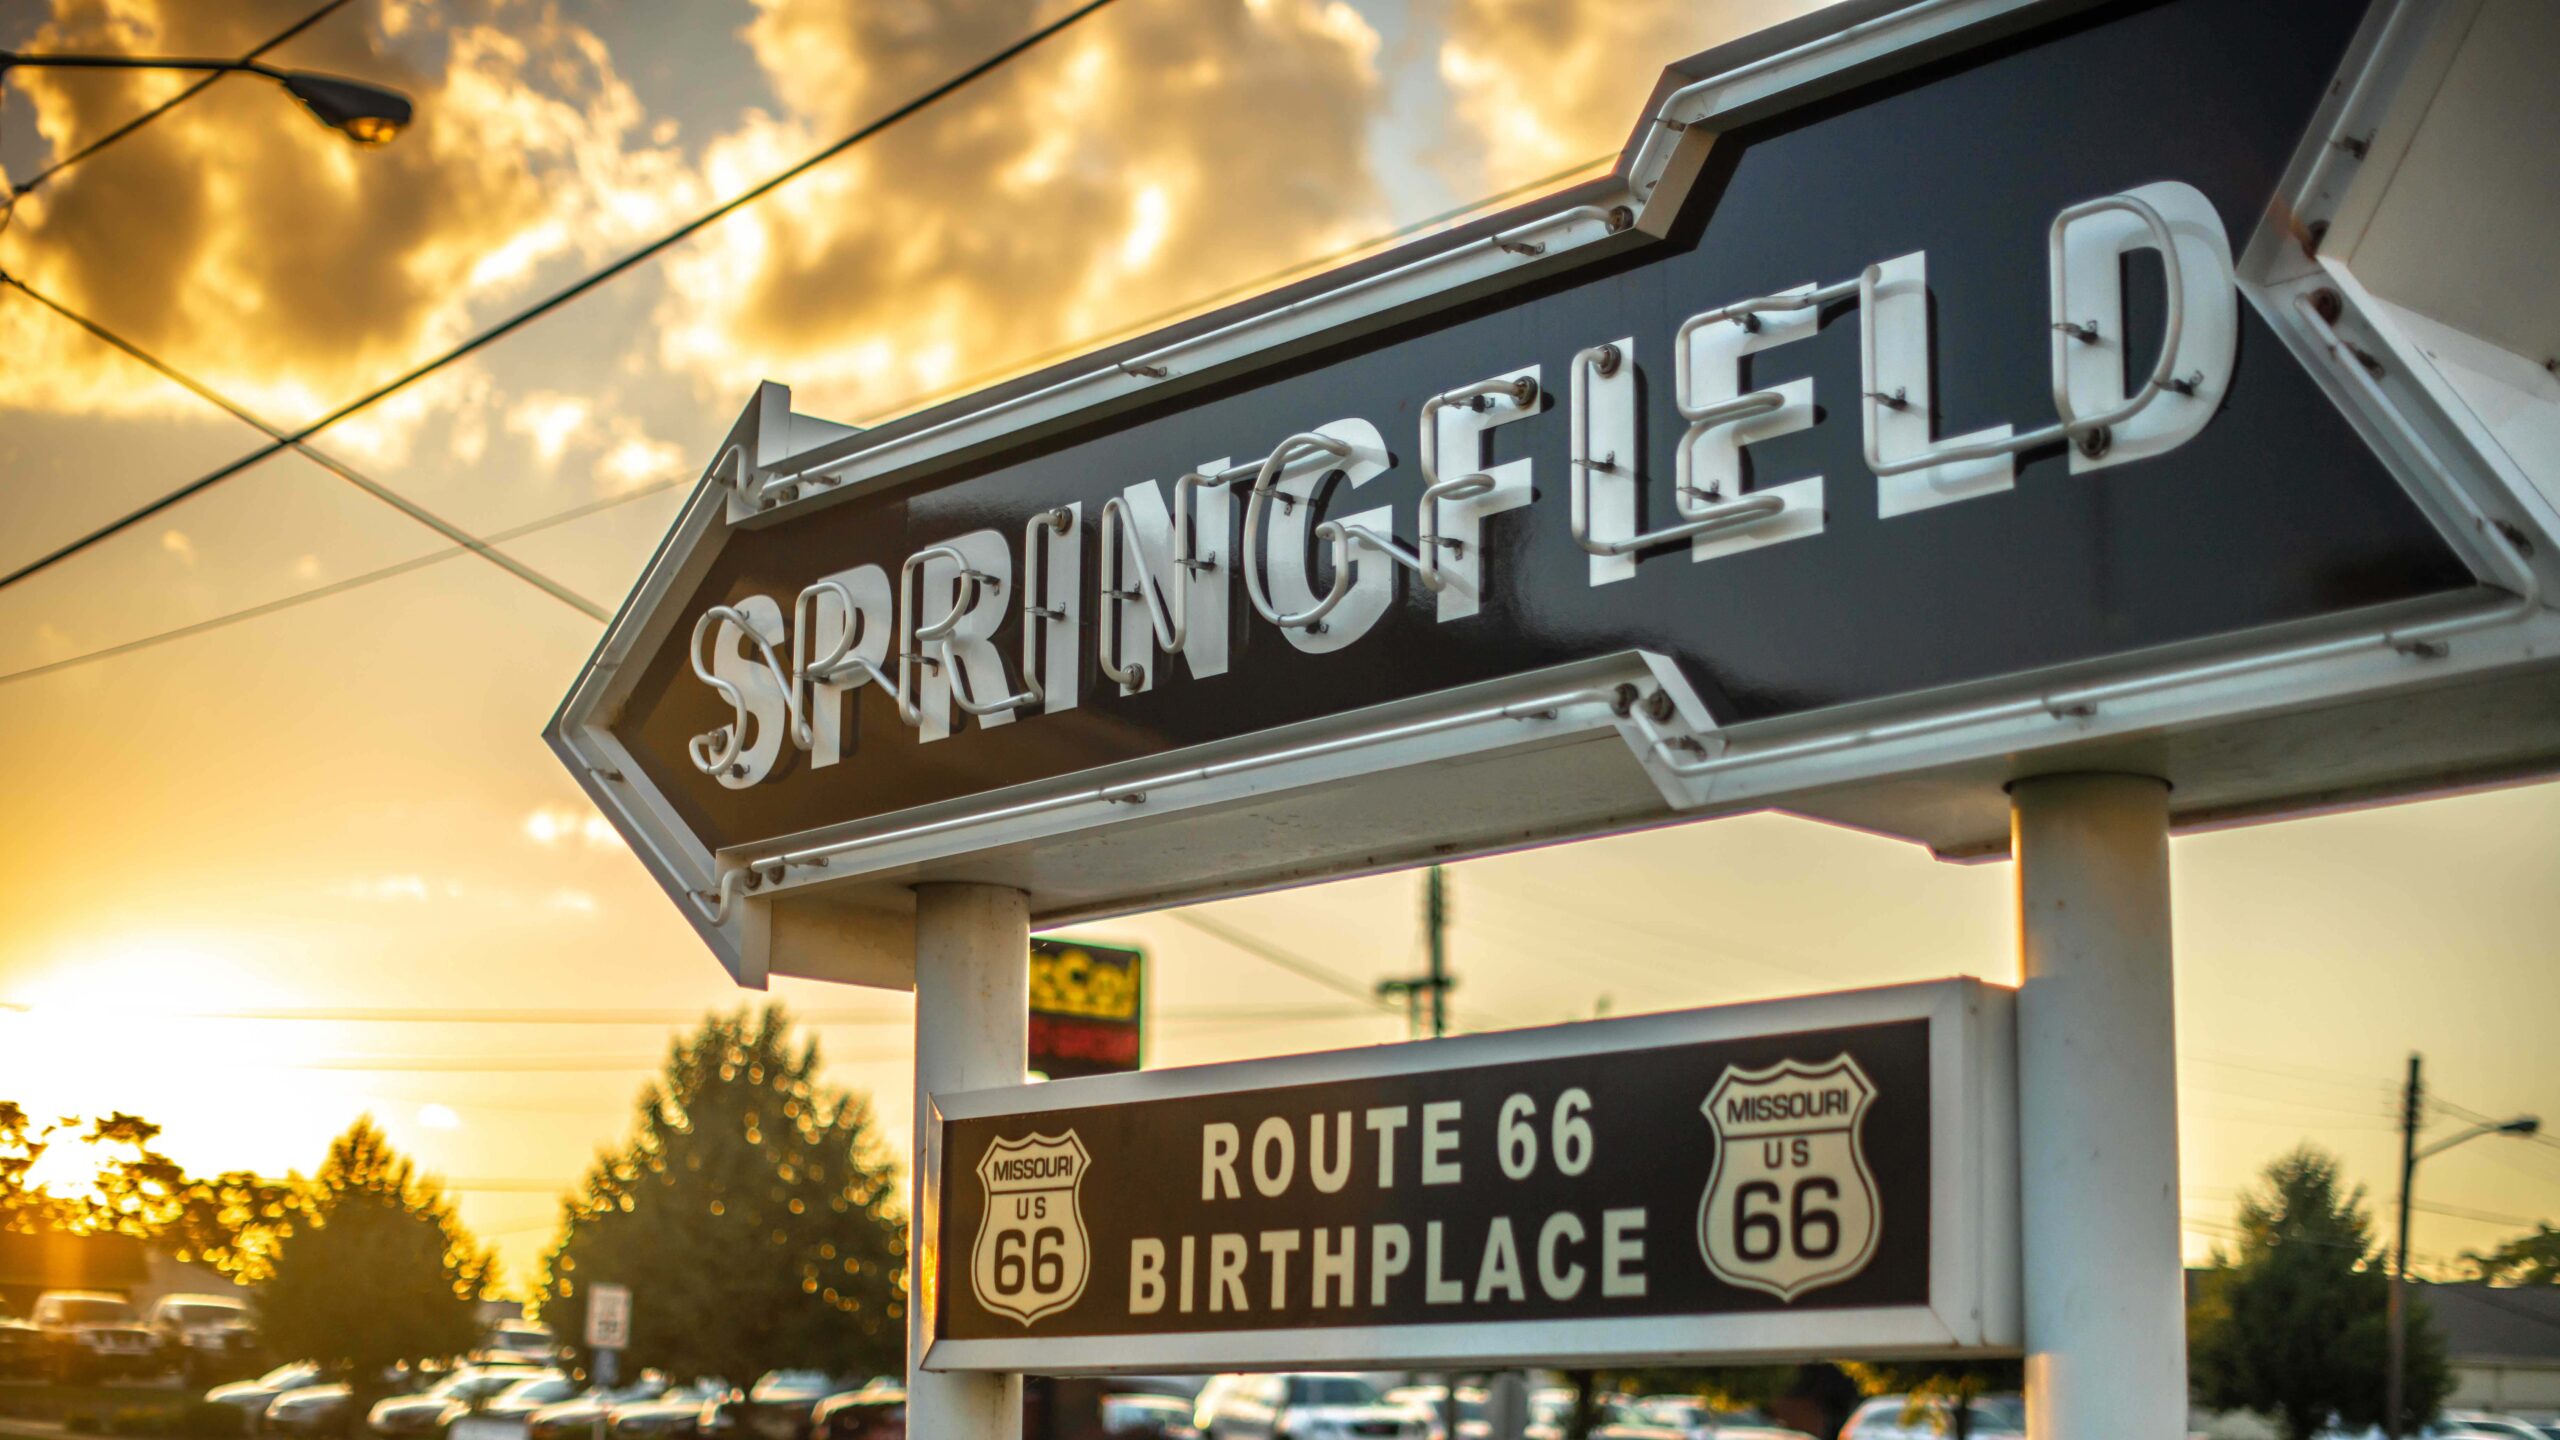 A picture of a sign that reads, "Springifeld: Birthplace of Route 66" at sunset